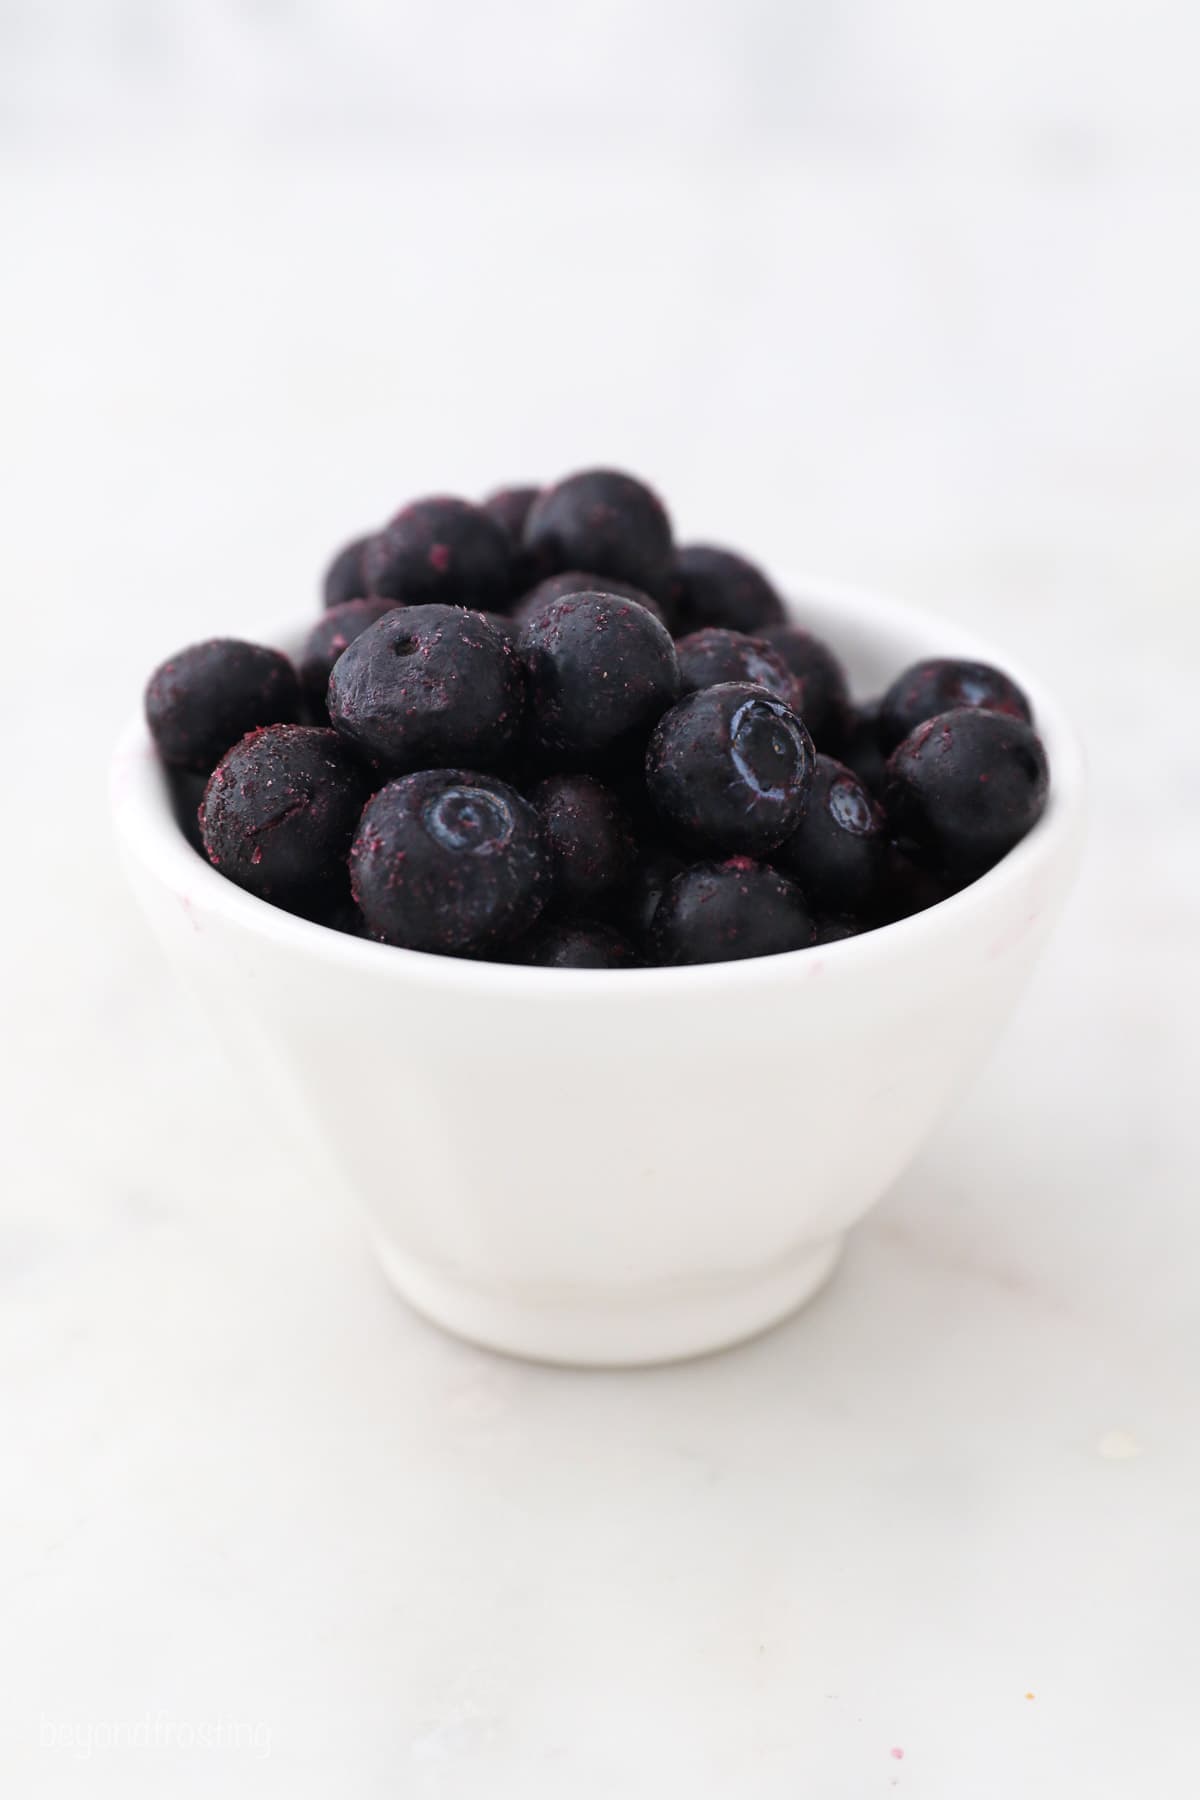 Blueberries in a white bowl.